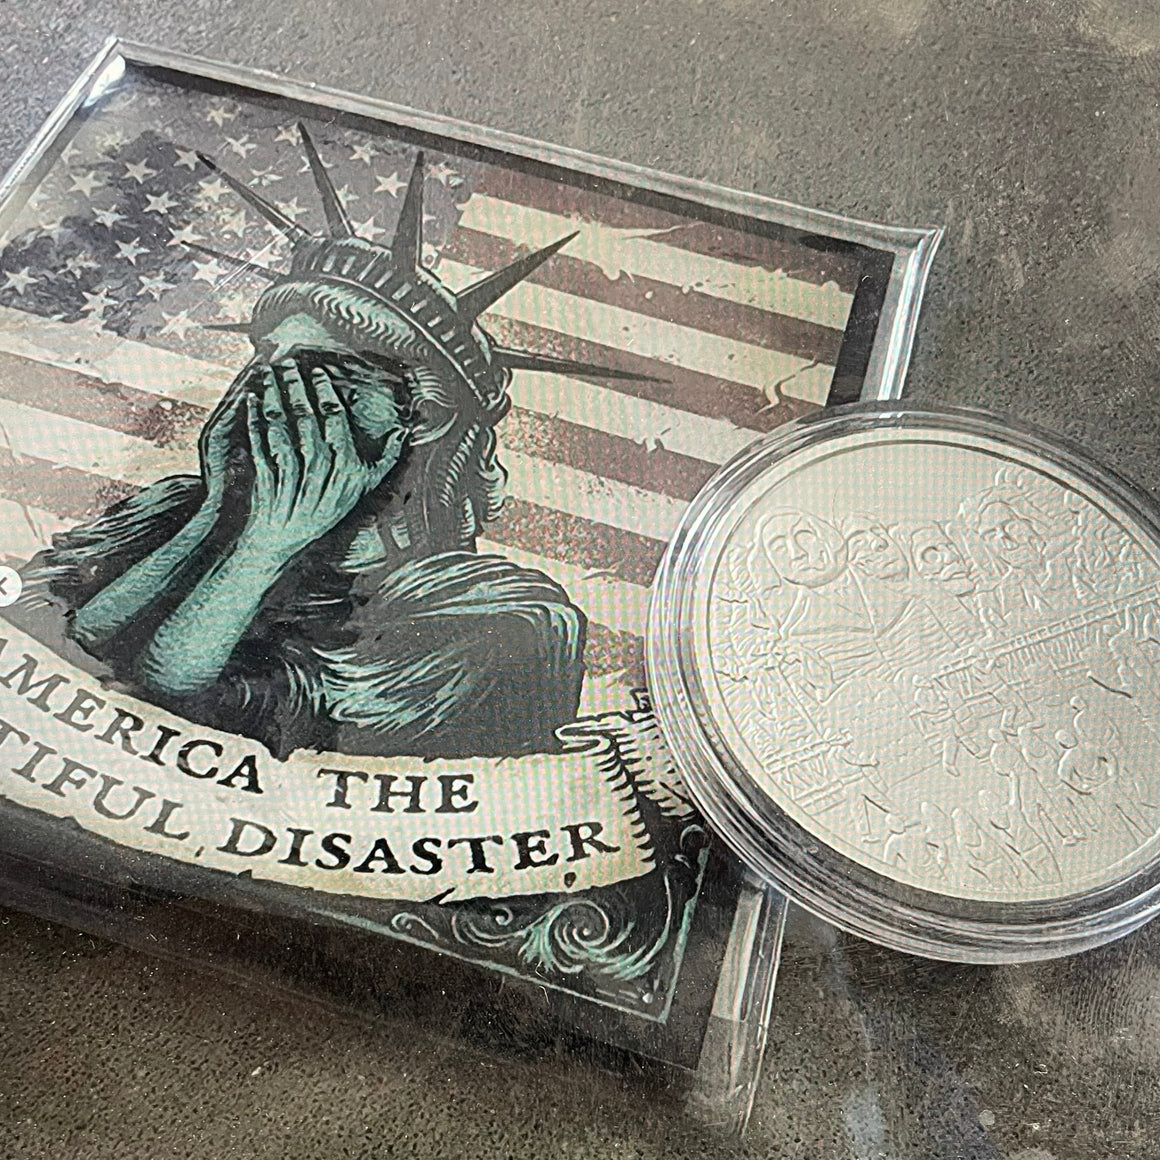 Shrine of Democracy by Reckless Metals, 1oz .999 Silver Round